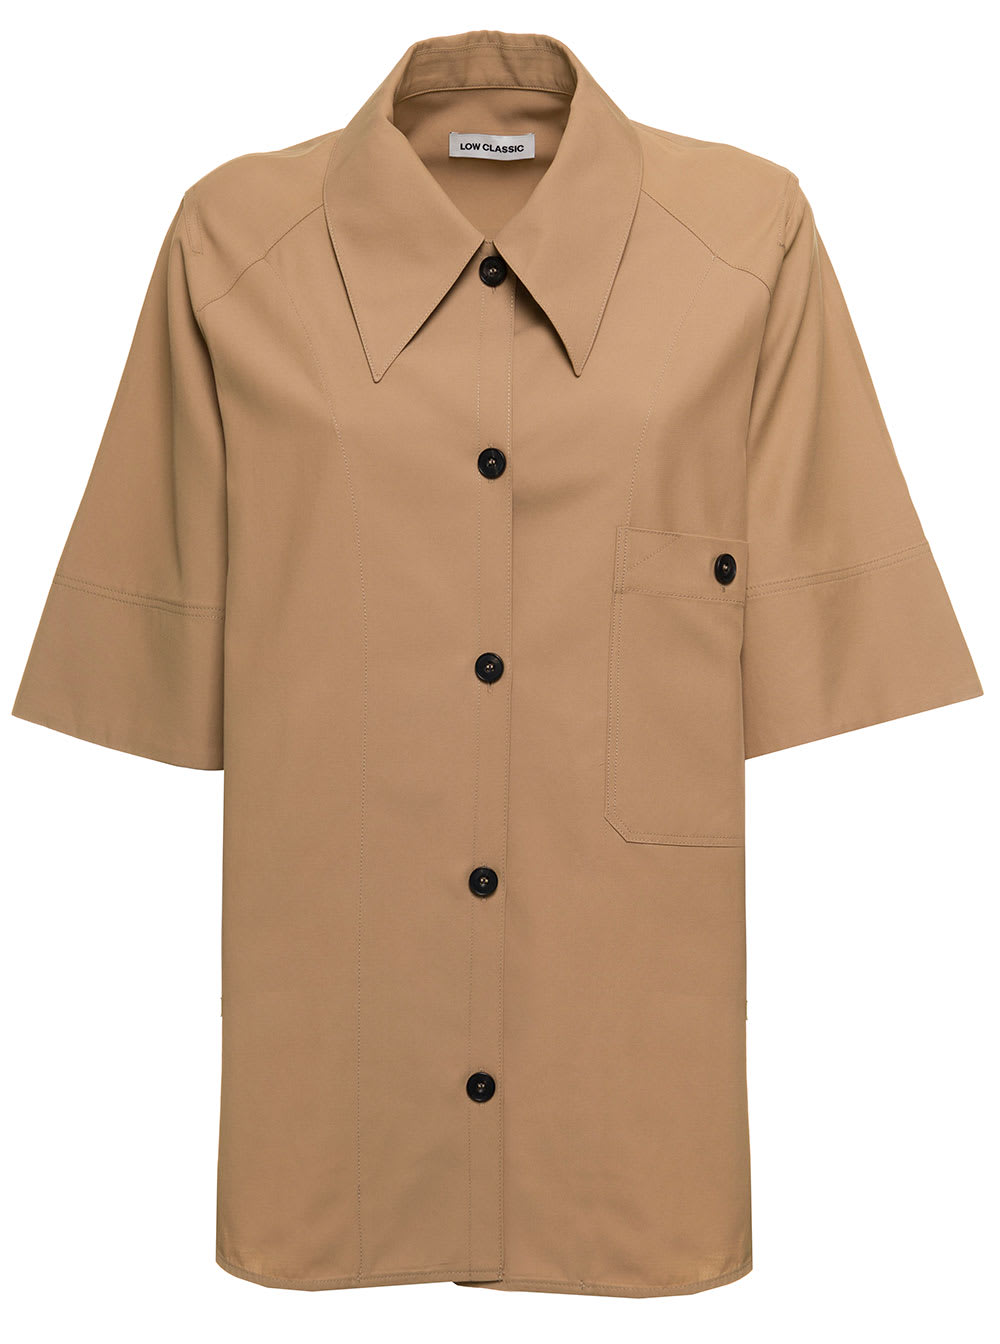 Low Classic Womans Beige Rayon Blend Shirt